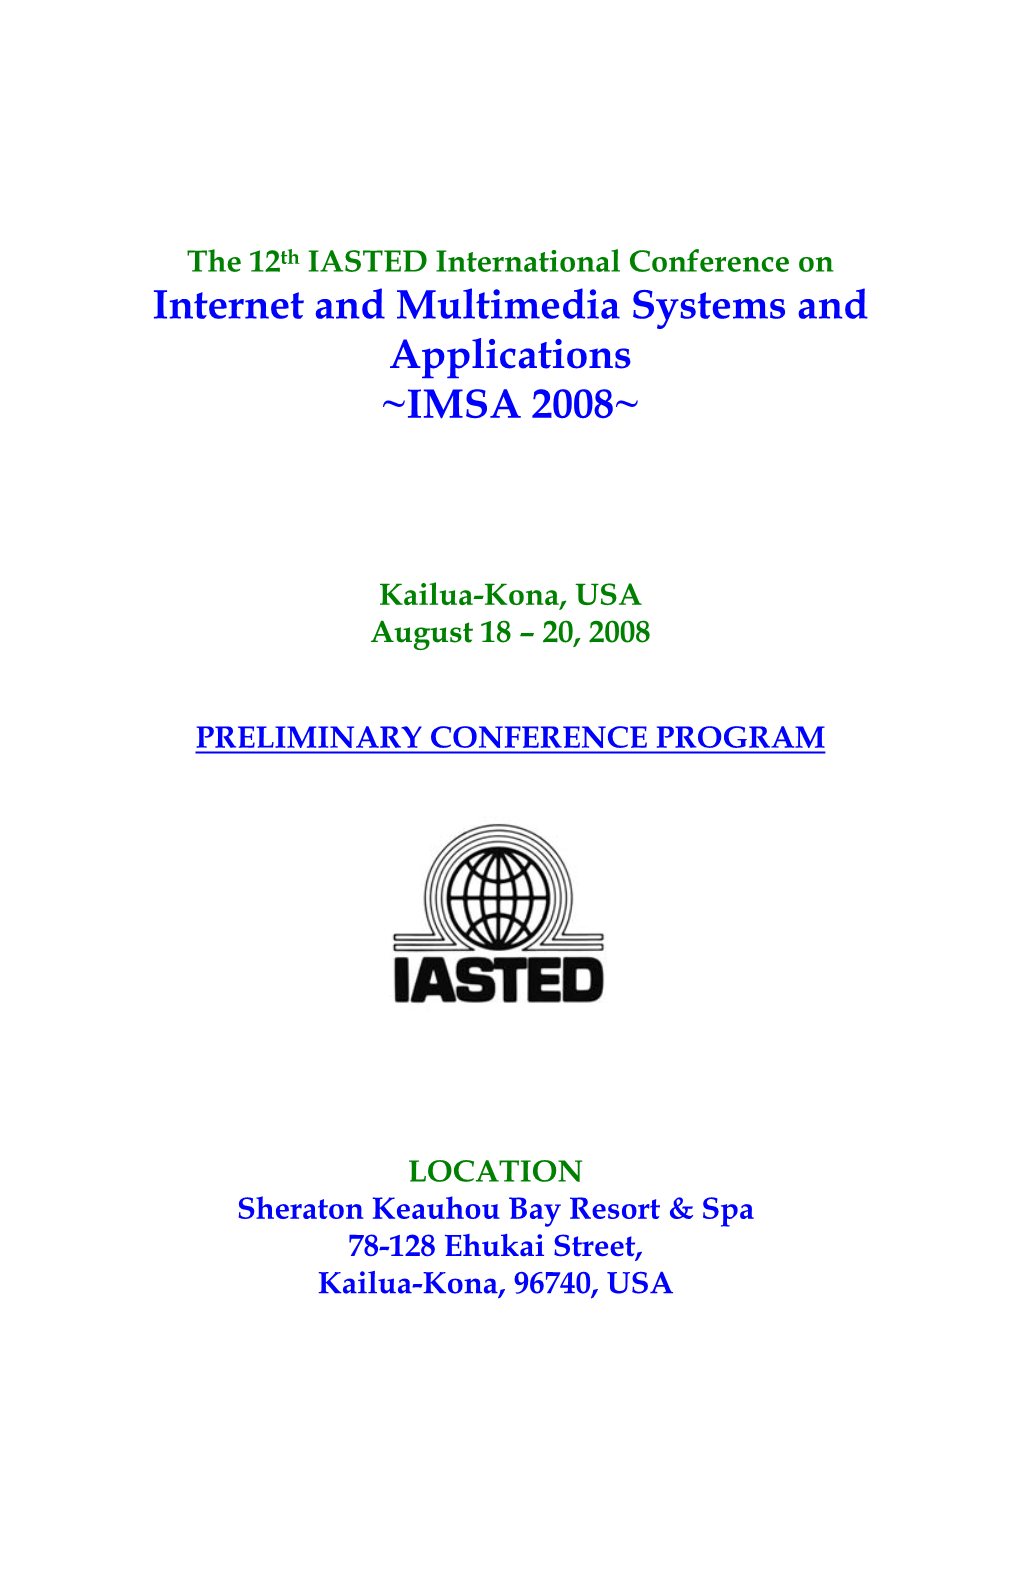 Internet and Multimedia Systems and Applications ~IMSA 2008~